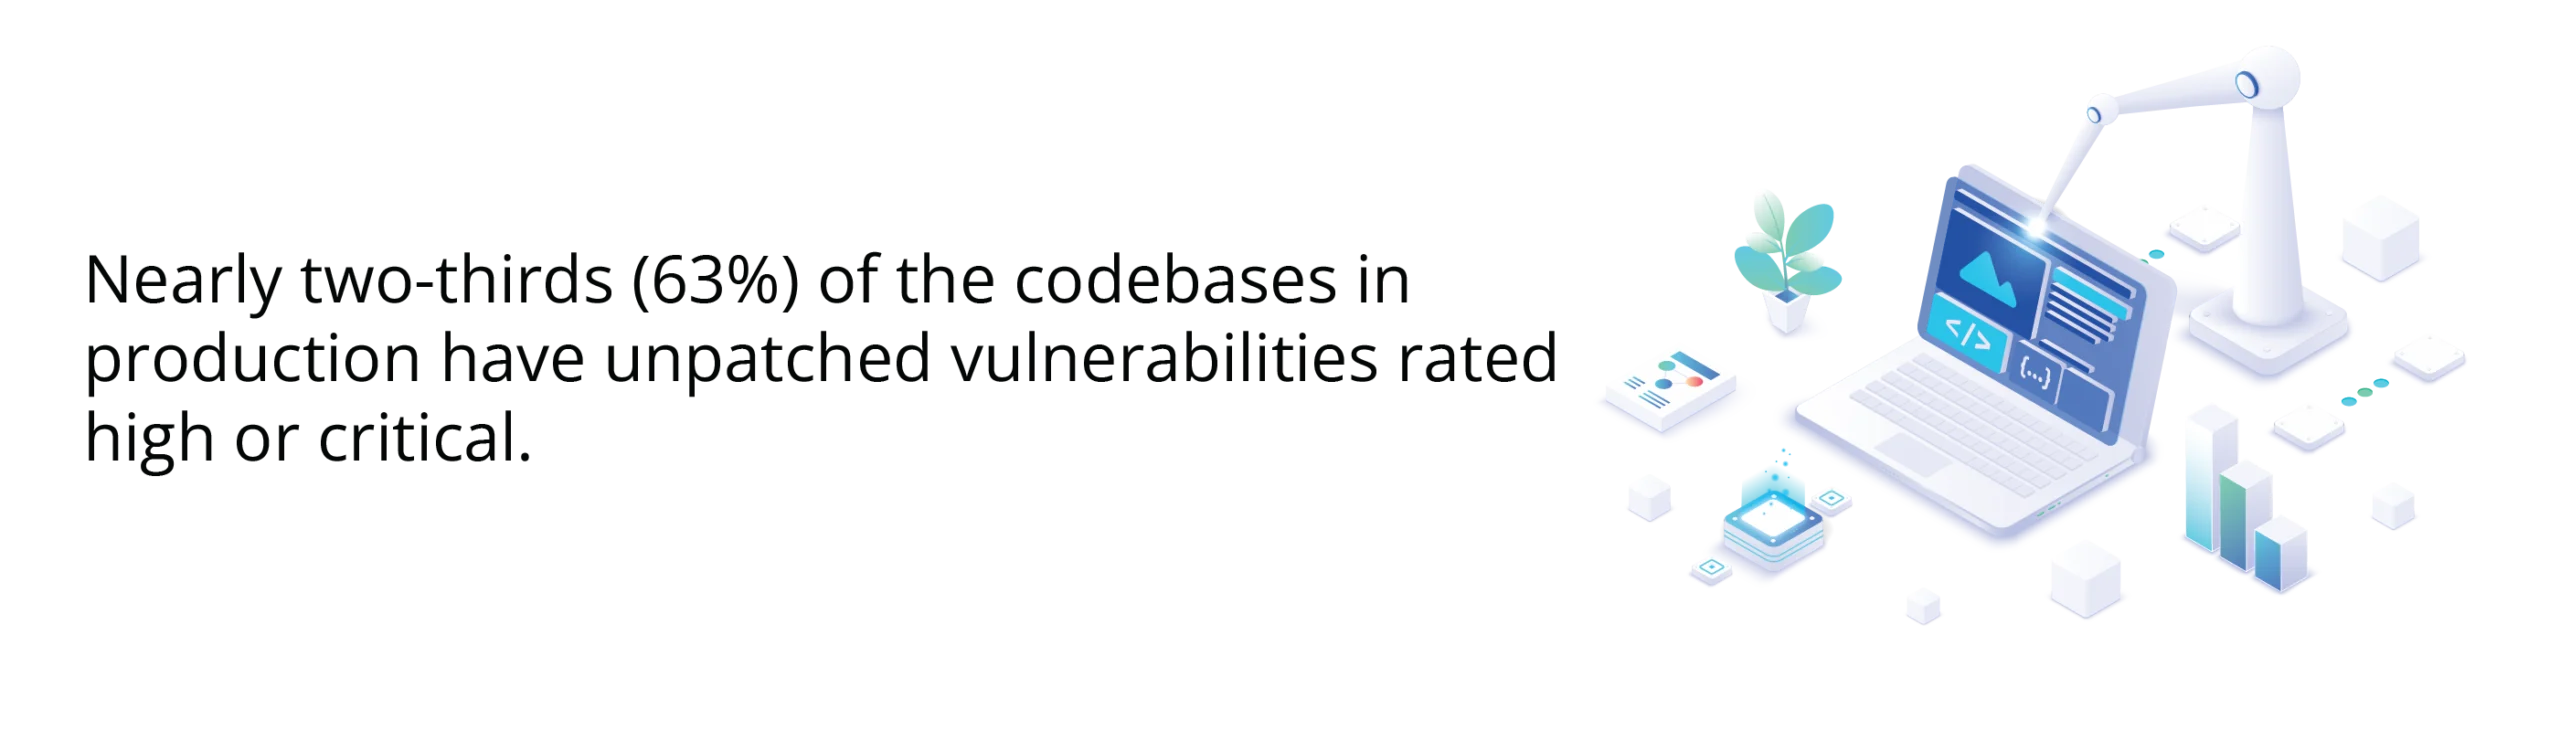 nearly two-thirds (63%) of the codebases in production have unpatched vulnerabilities rated high or critical.